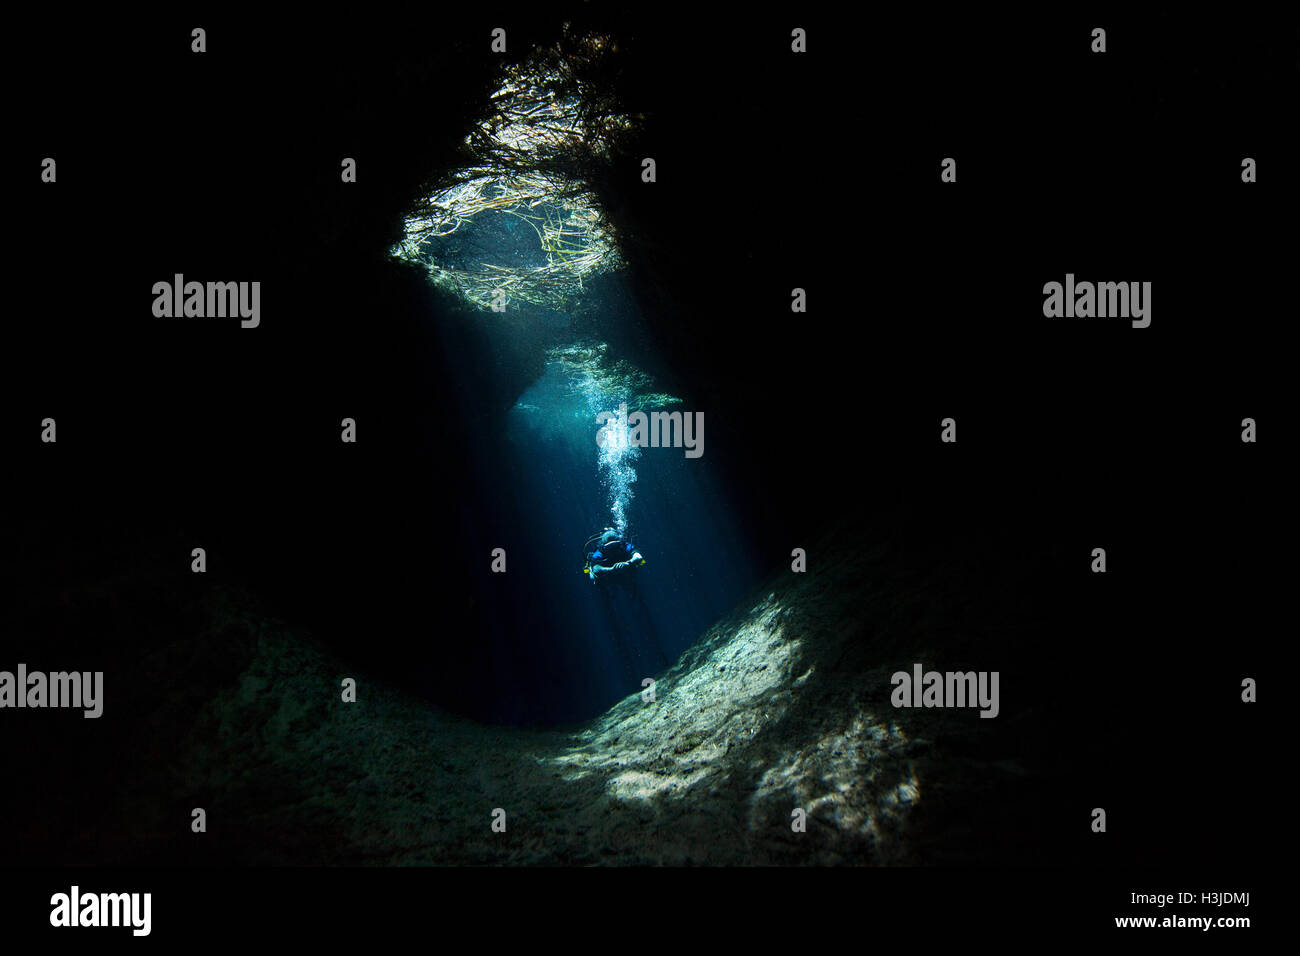 SCUBA diving the underwater cave in Media Luna freshwater lagoon near ...